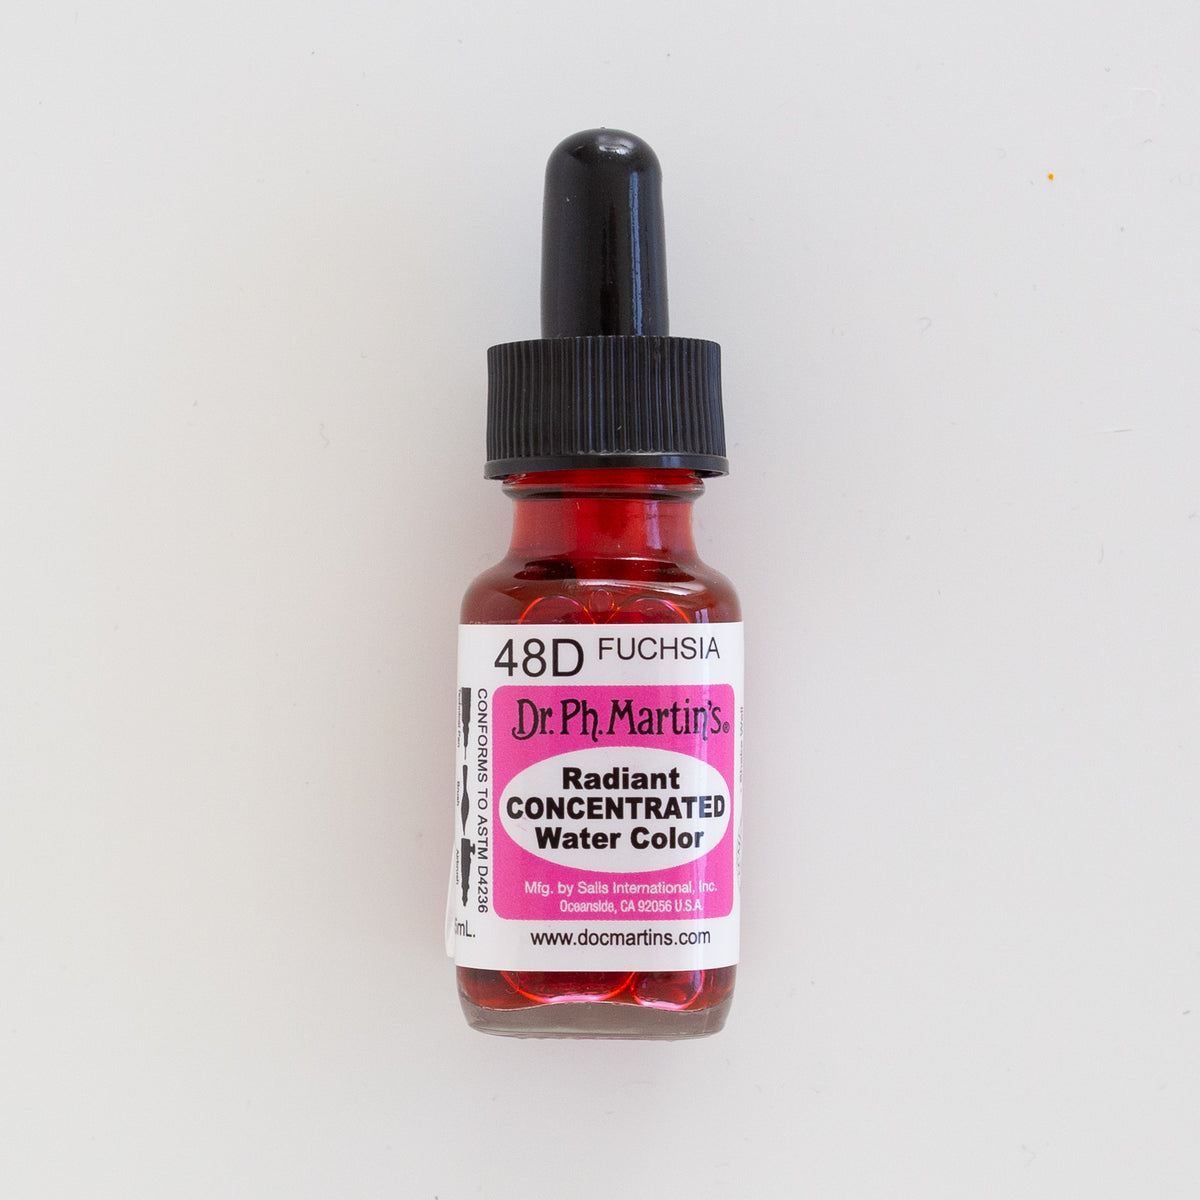 Dr. Ph. Martin’s Radiant Concentrated 48D Fuchsia